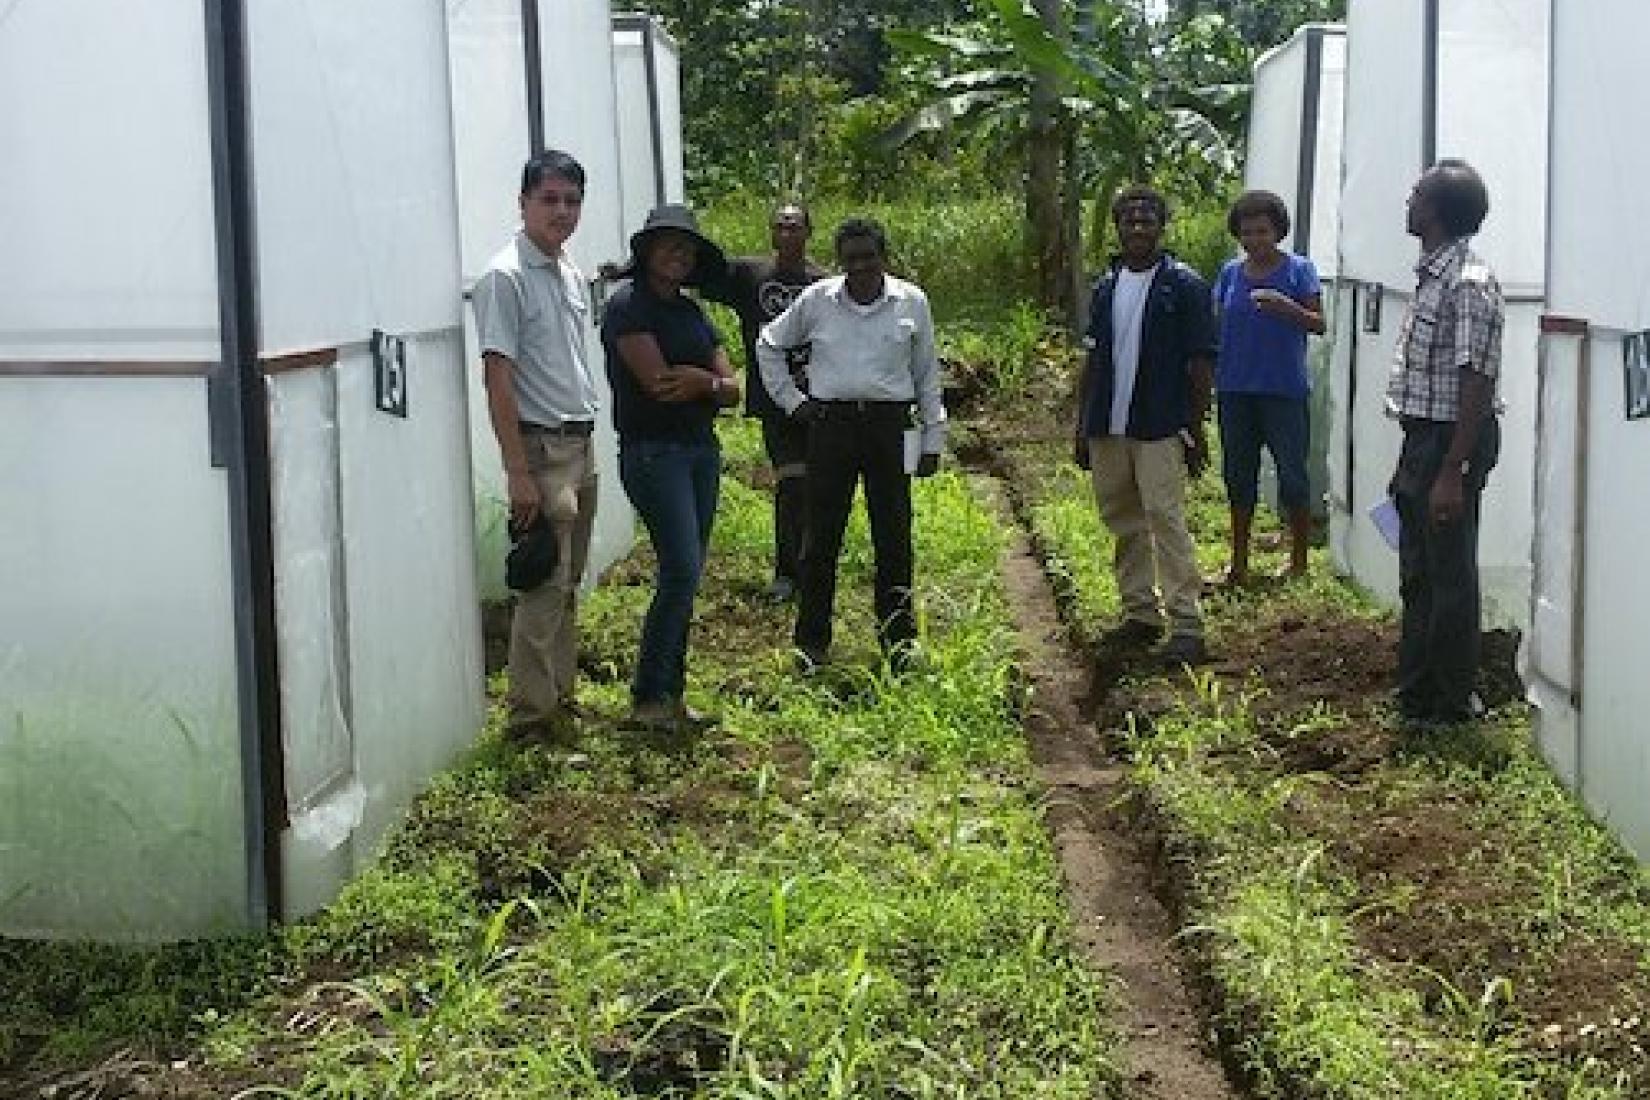 Researchers standing next to test facilities where vector screening takes place in Mobdu, Madang, PNG.